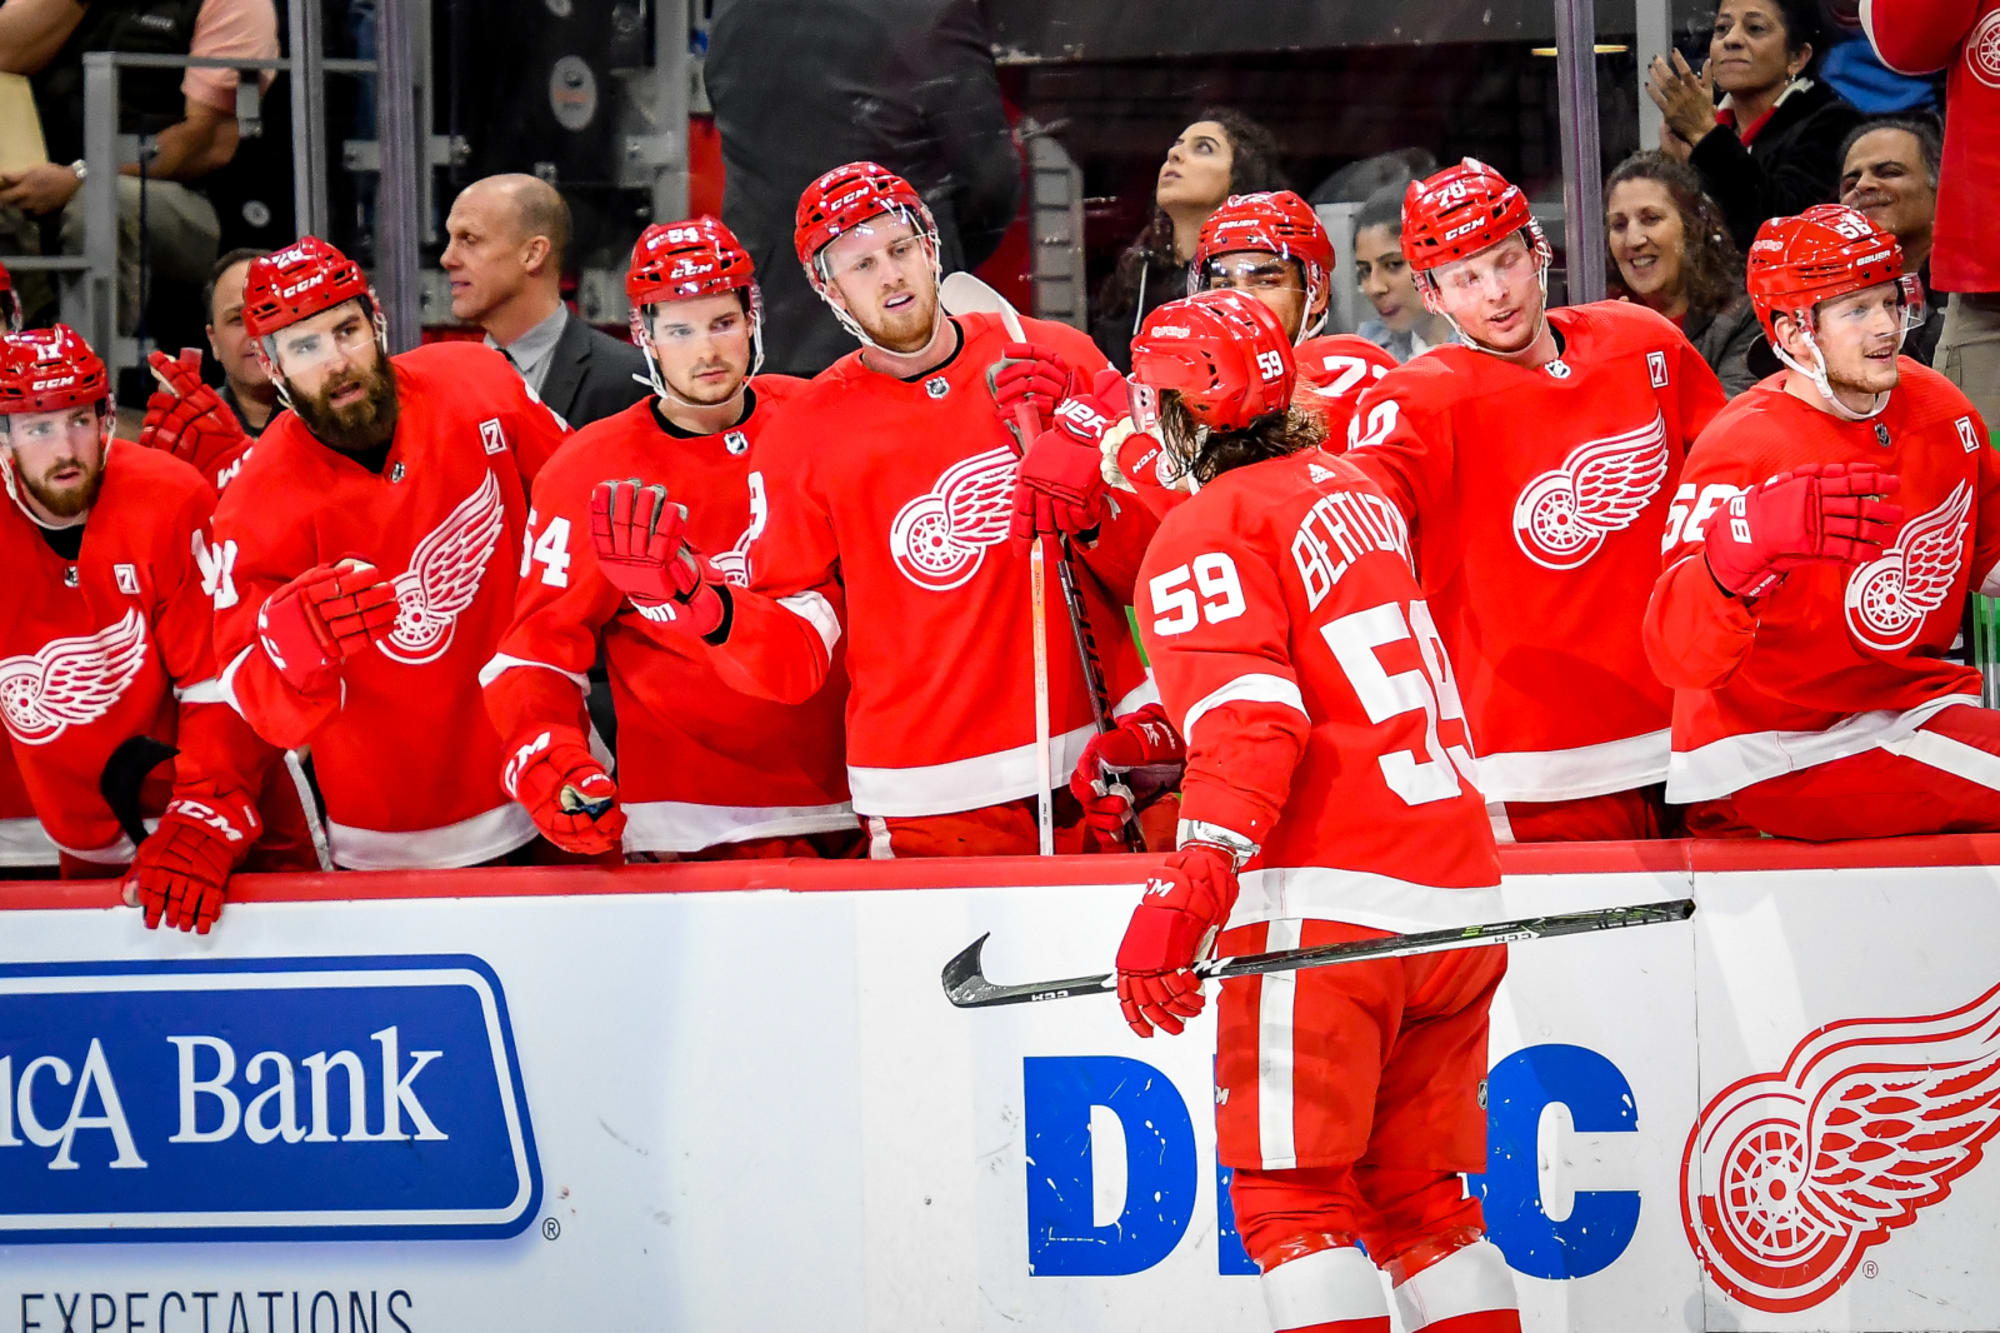 Should the Detroit Red Wings trade back in the NHL draft?